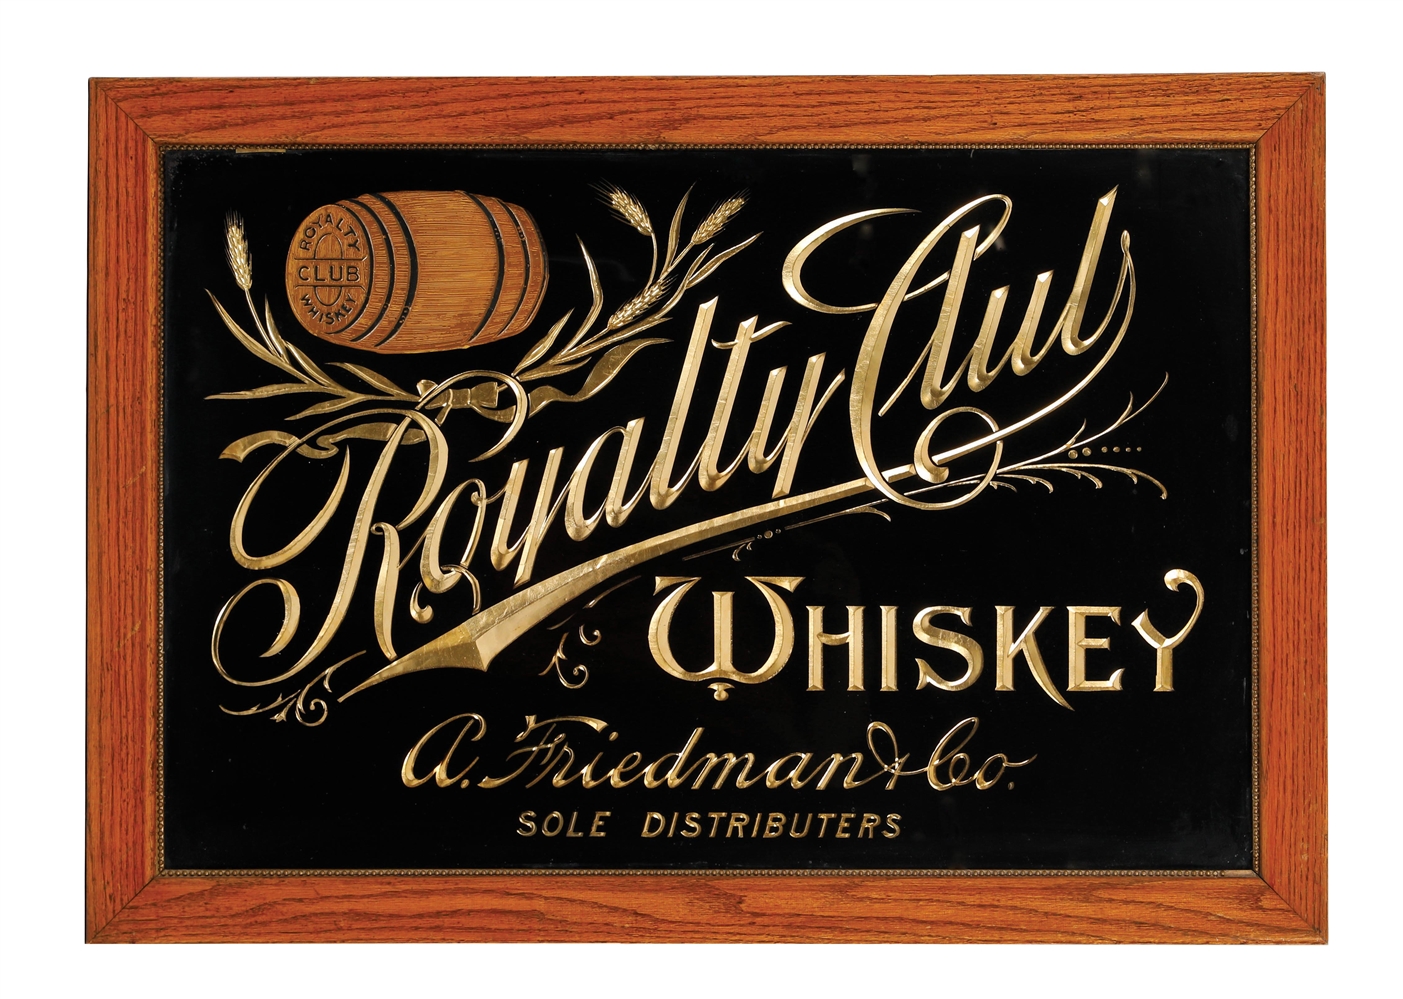 "ROYALTY CLUB WHISKEY" REVERSED PAINTED GLASS SIGN W/ BARREL GRAPHIC